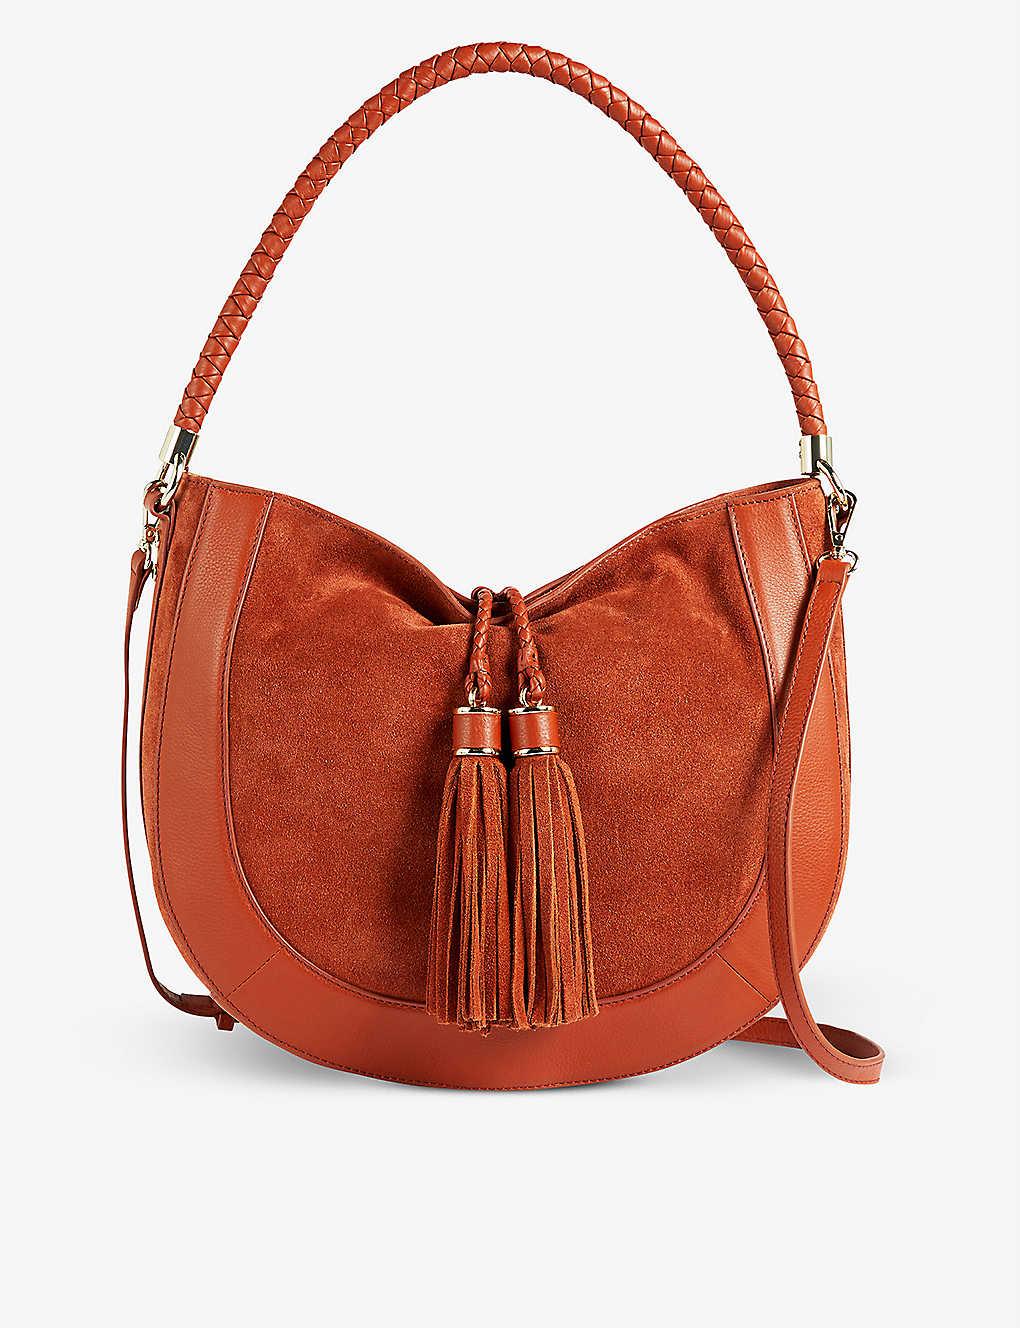 Braided leather shoulder bag with braided handles